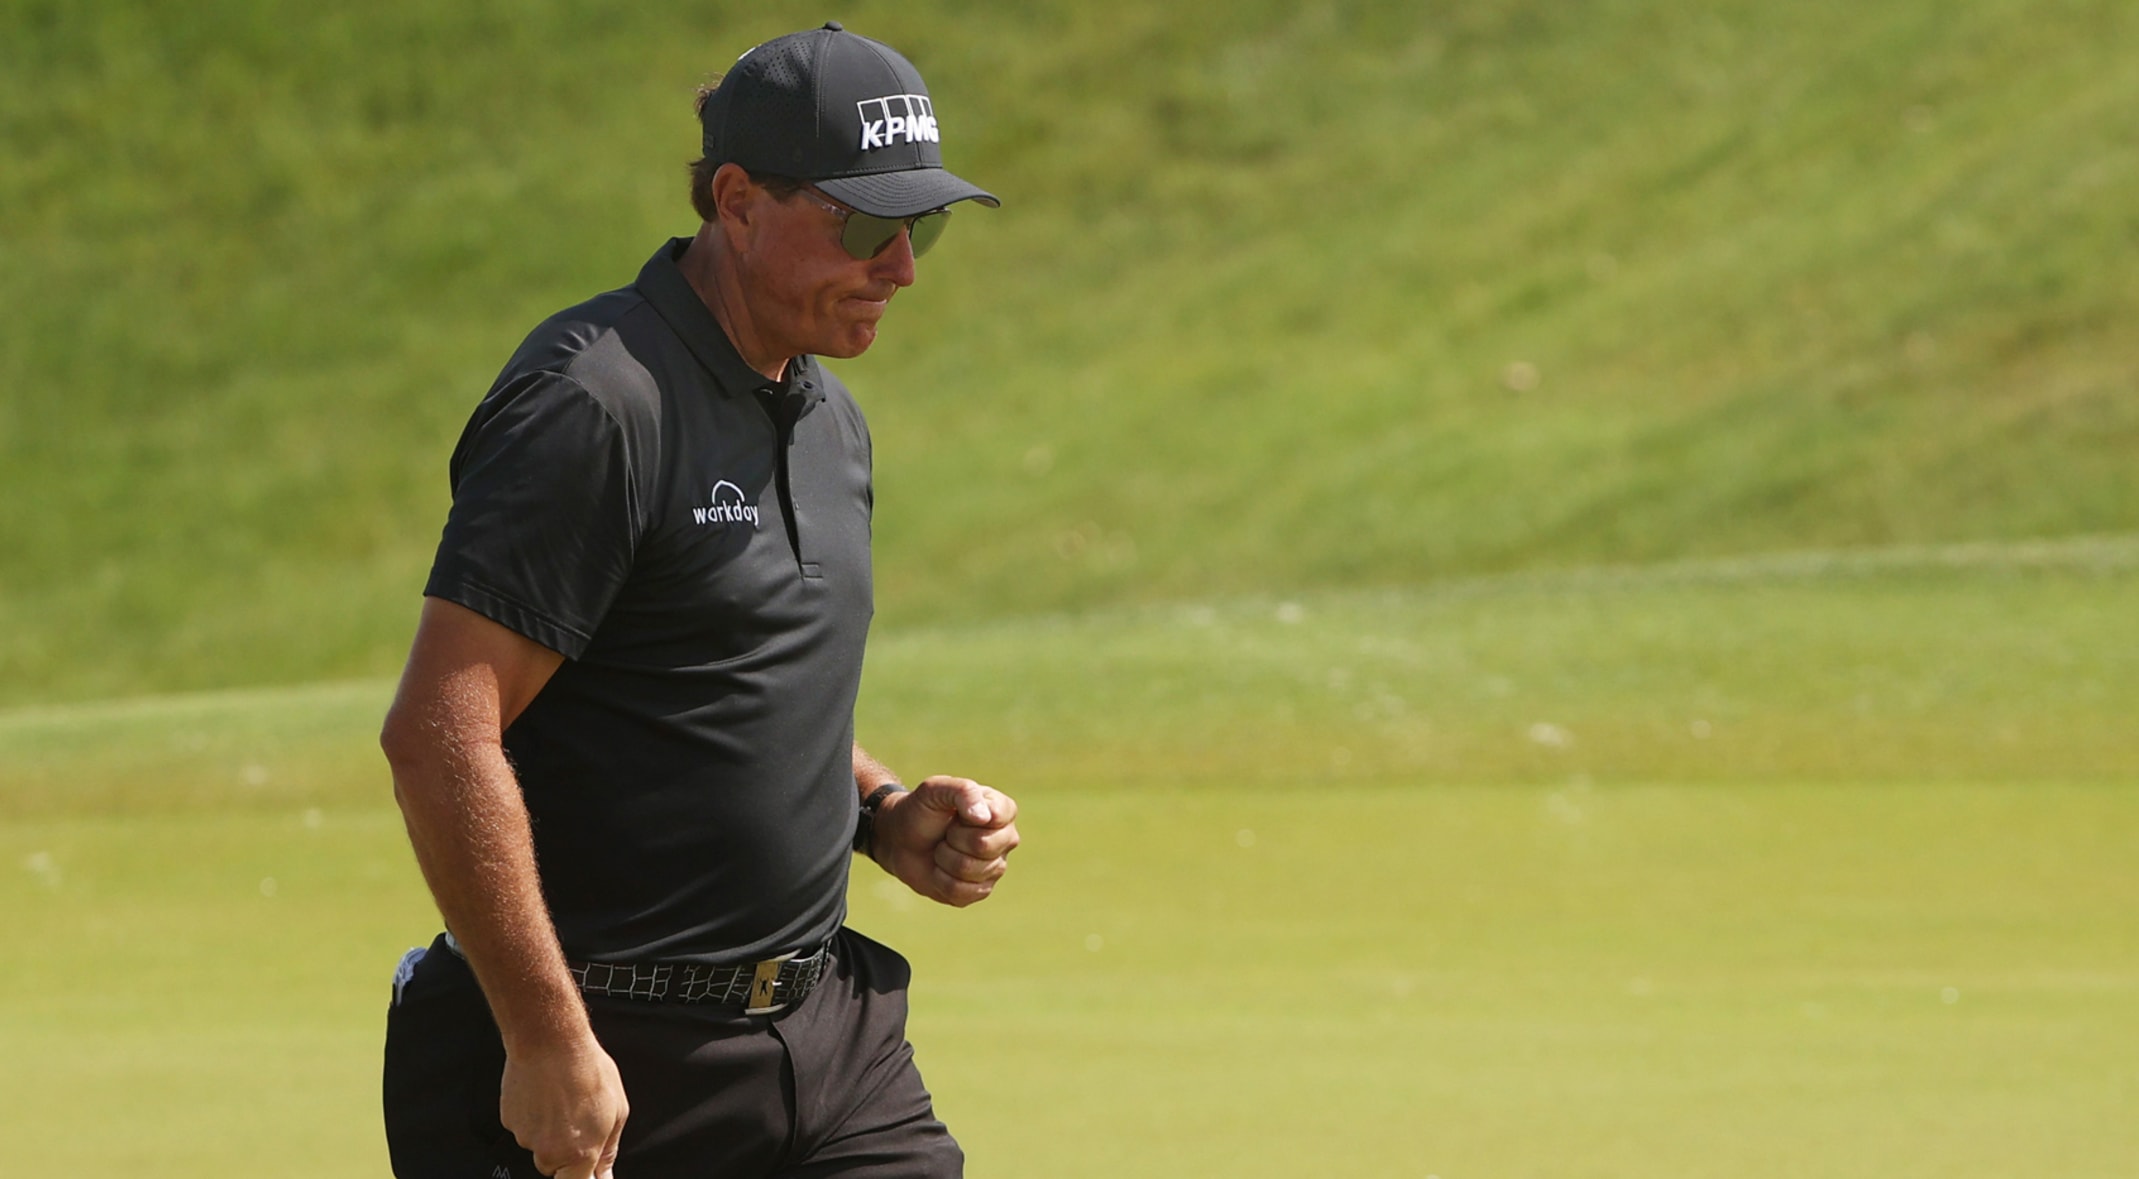 Phil Mickelson shaky but takes one-shot lead at PGA Championship